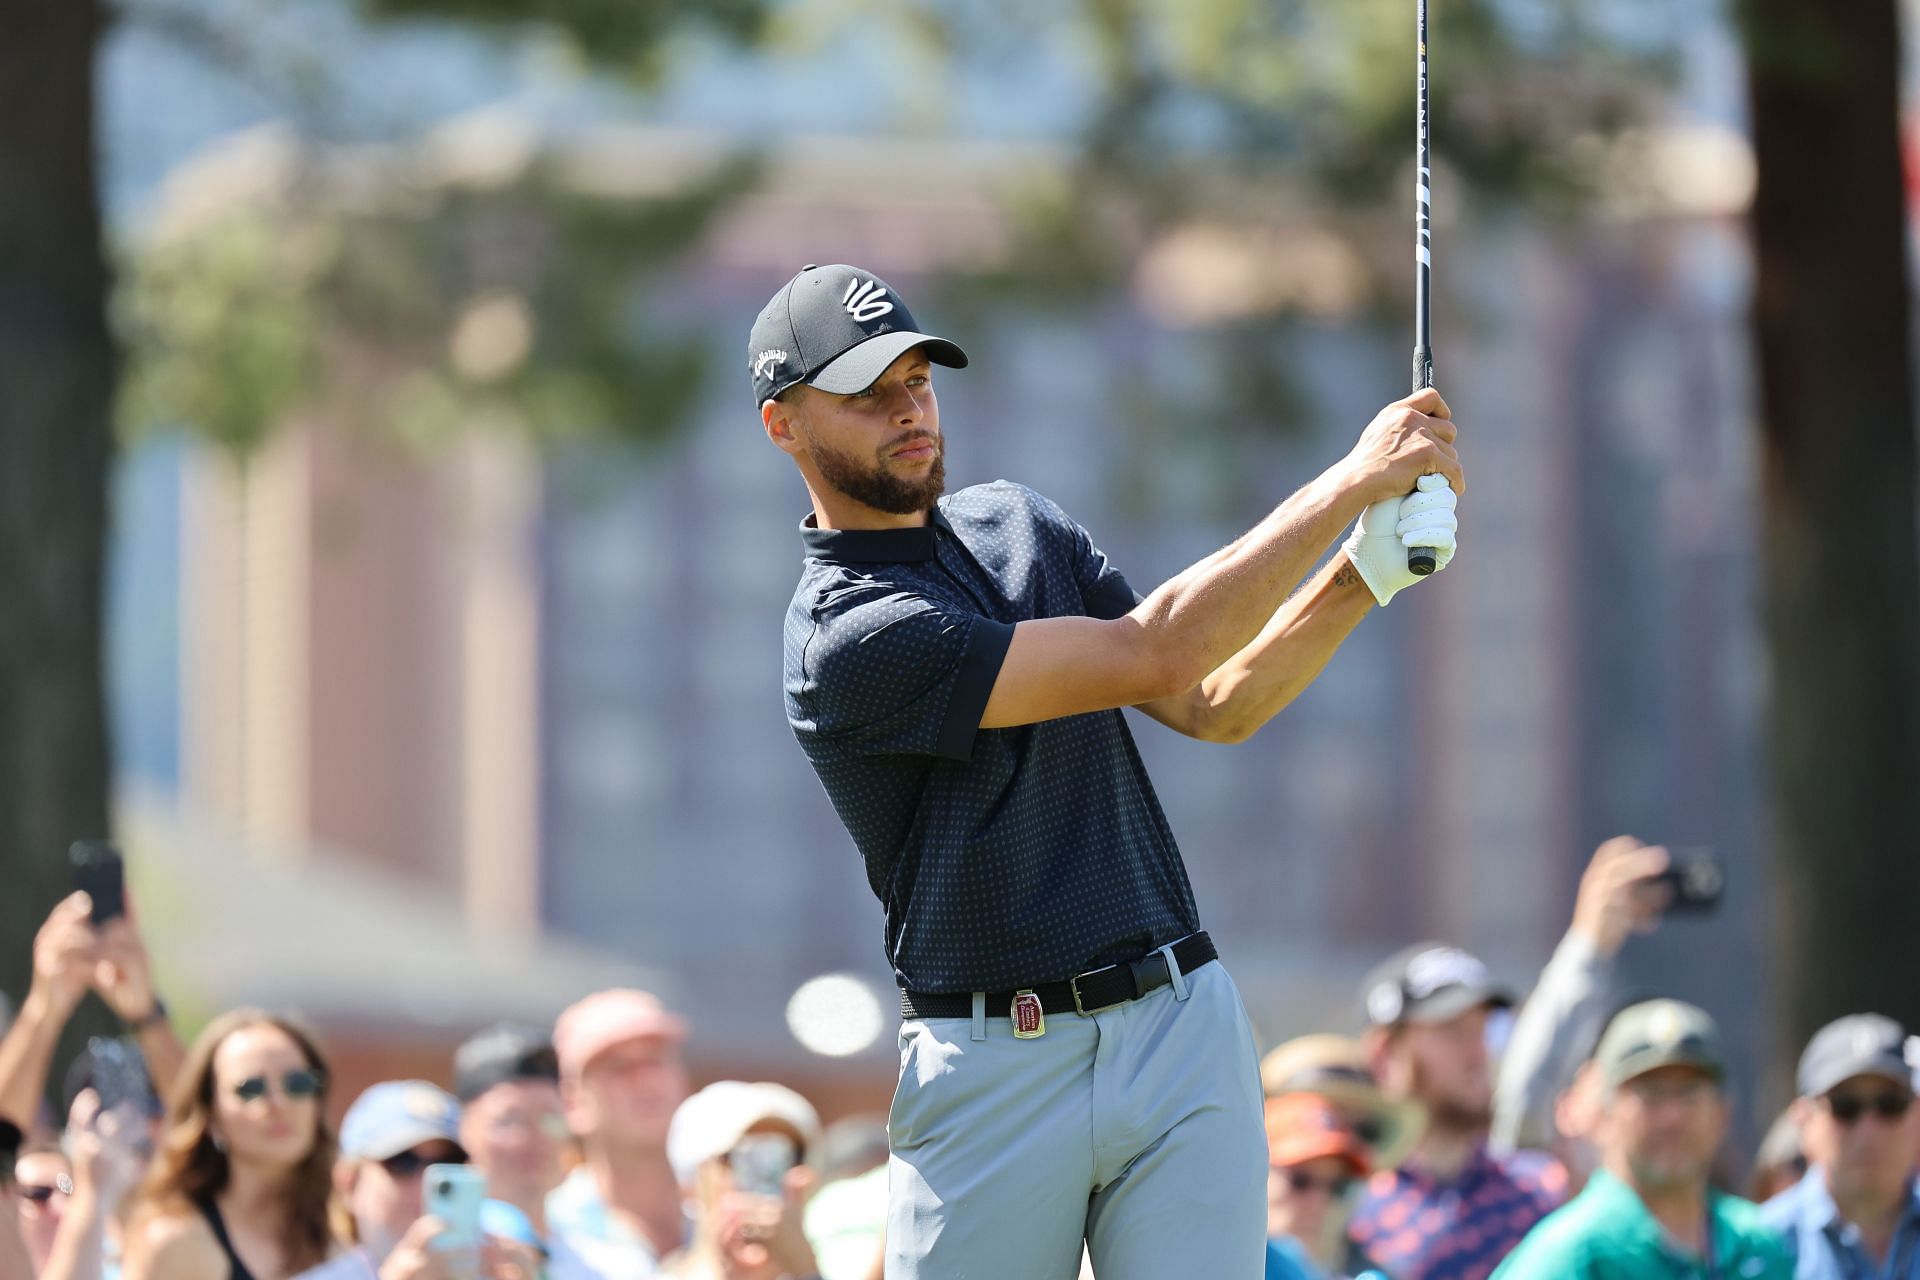 Stephen Curry at the 2023 American Century Championship (which he won, Image via Getty).